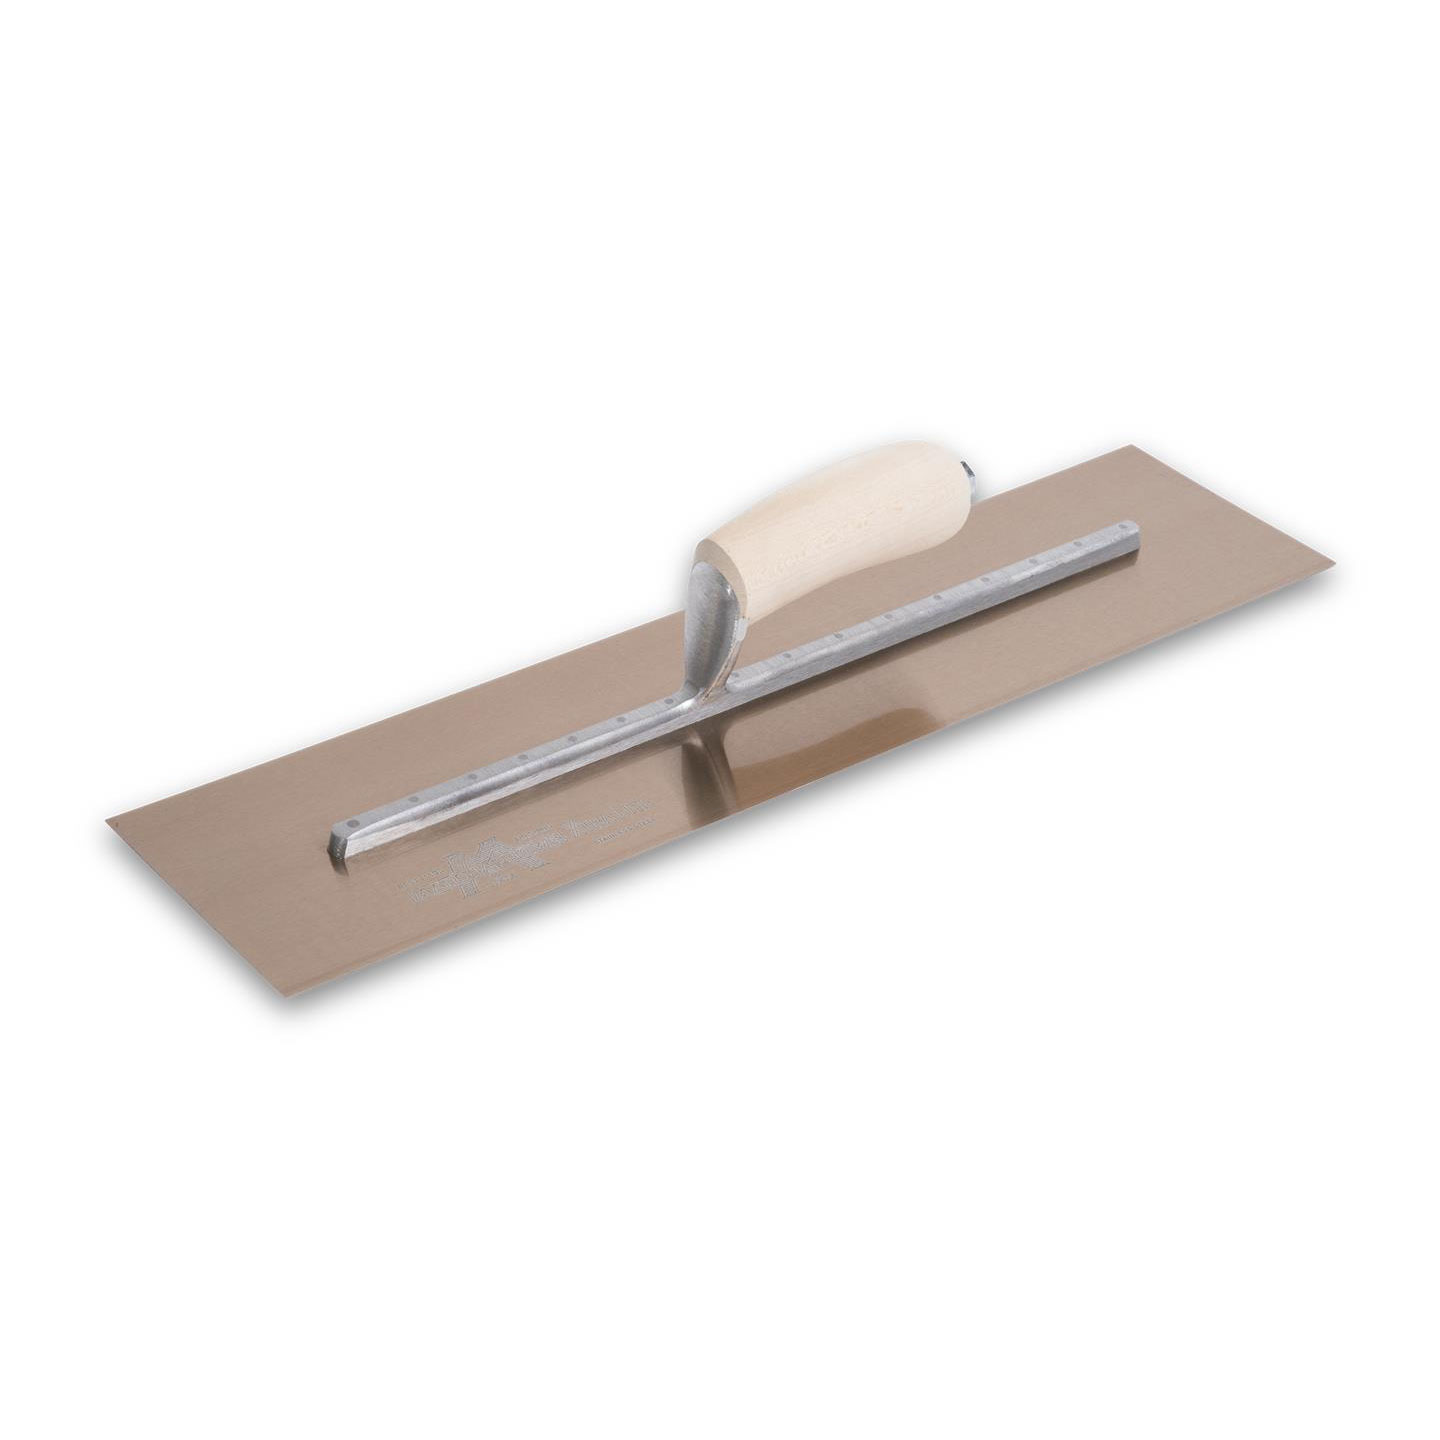 Marshalltown MXS815GS 18in x 5in GS Finishing Trowel Curved Wood Handle MAT-MXS815GS